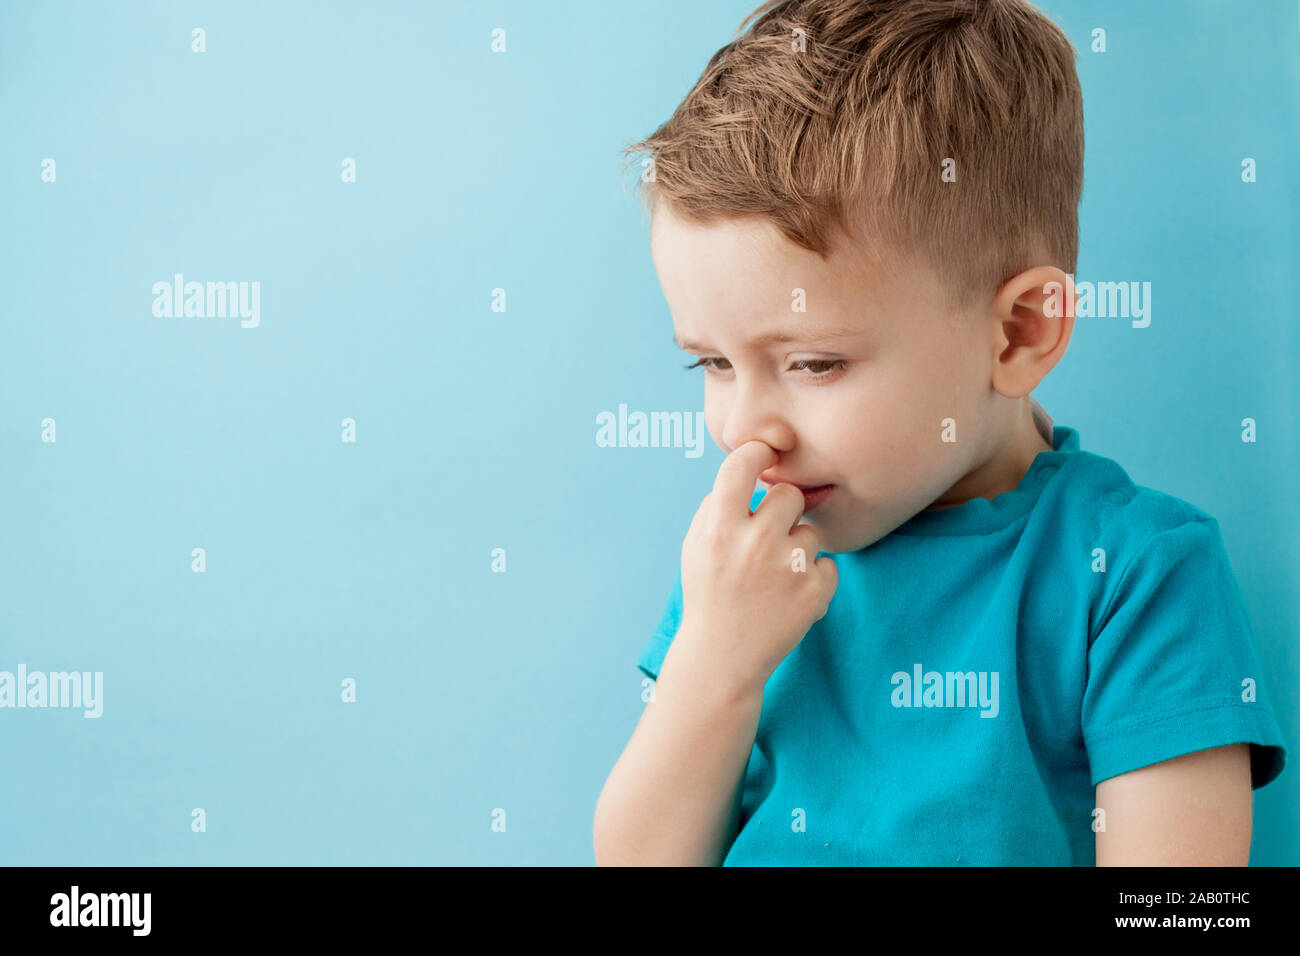 Little caucasian boy picking his nose on blue background. Stock Photo